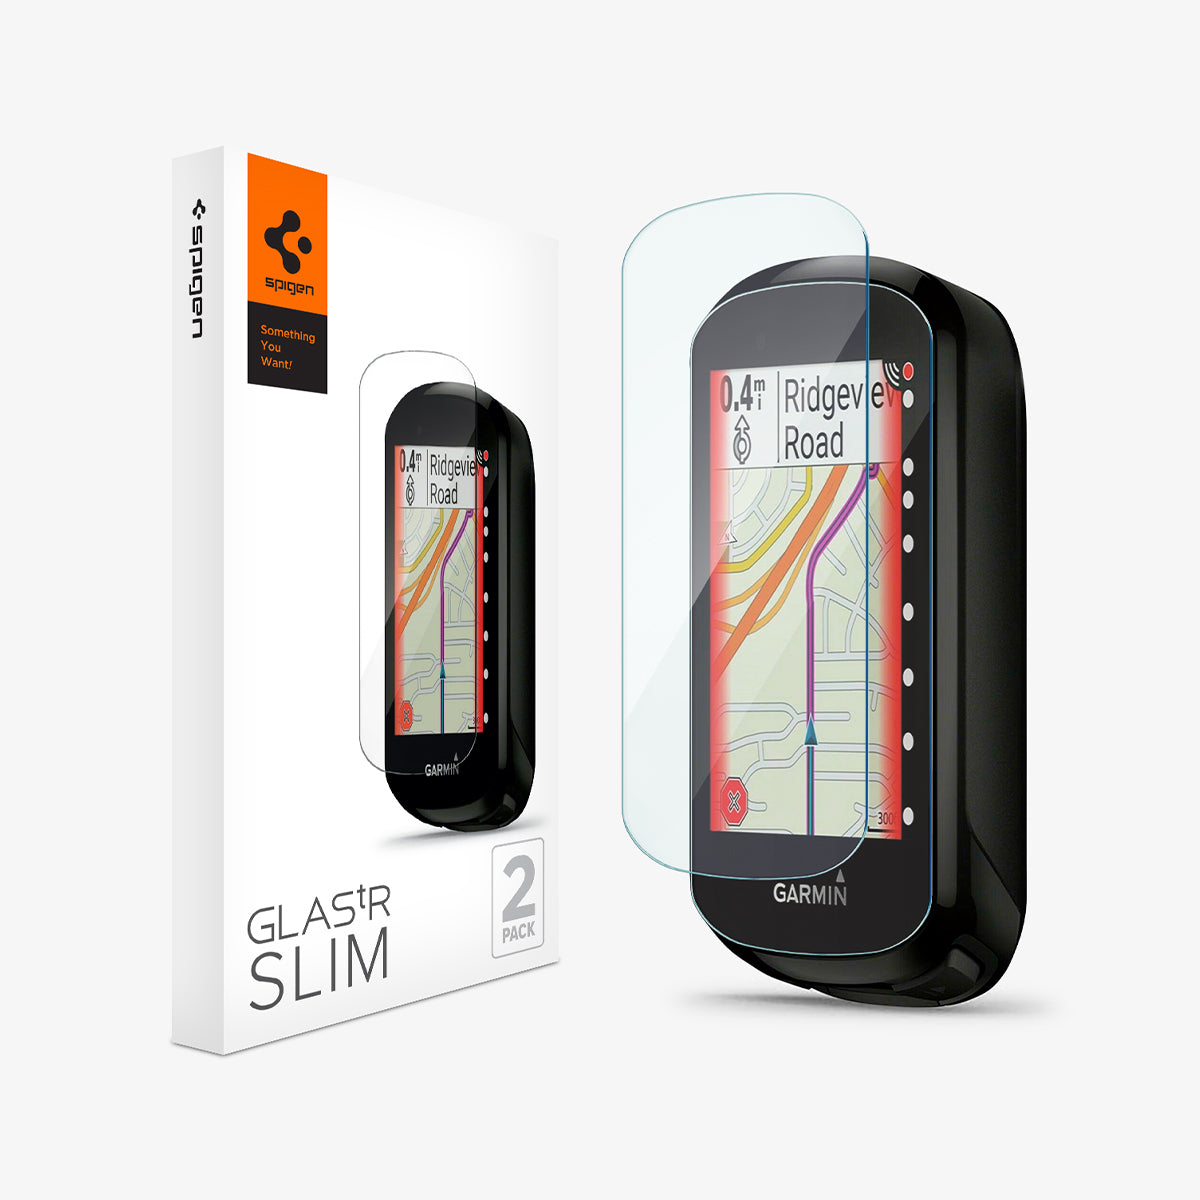 AGL04691 - Garmin Edge 830 Screen Protector GLAS.tR SLIM showing the device, screen protector and packaging